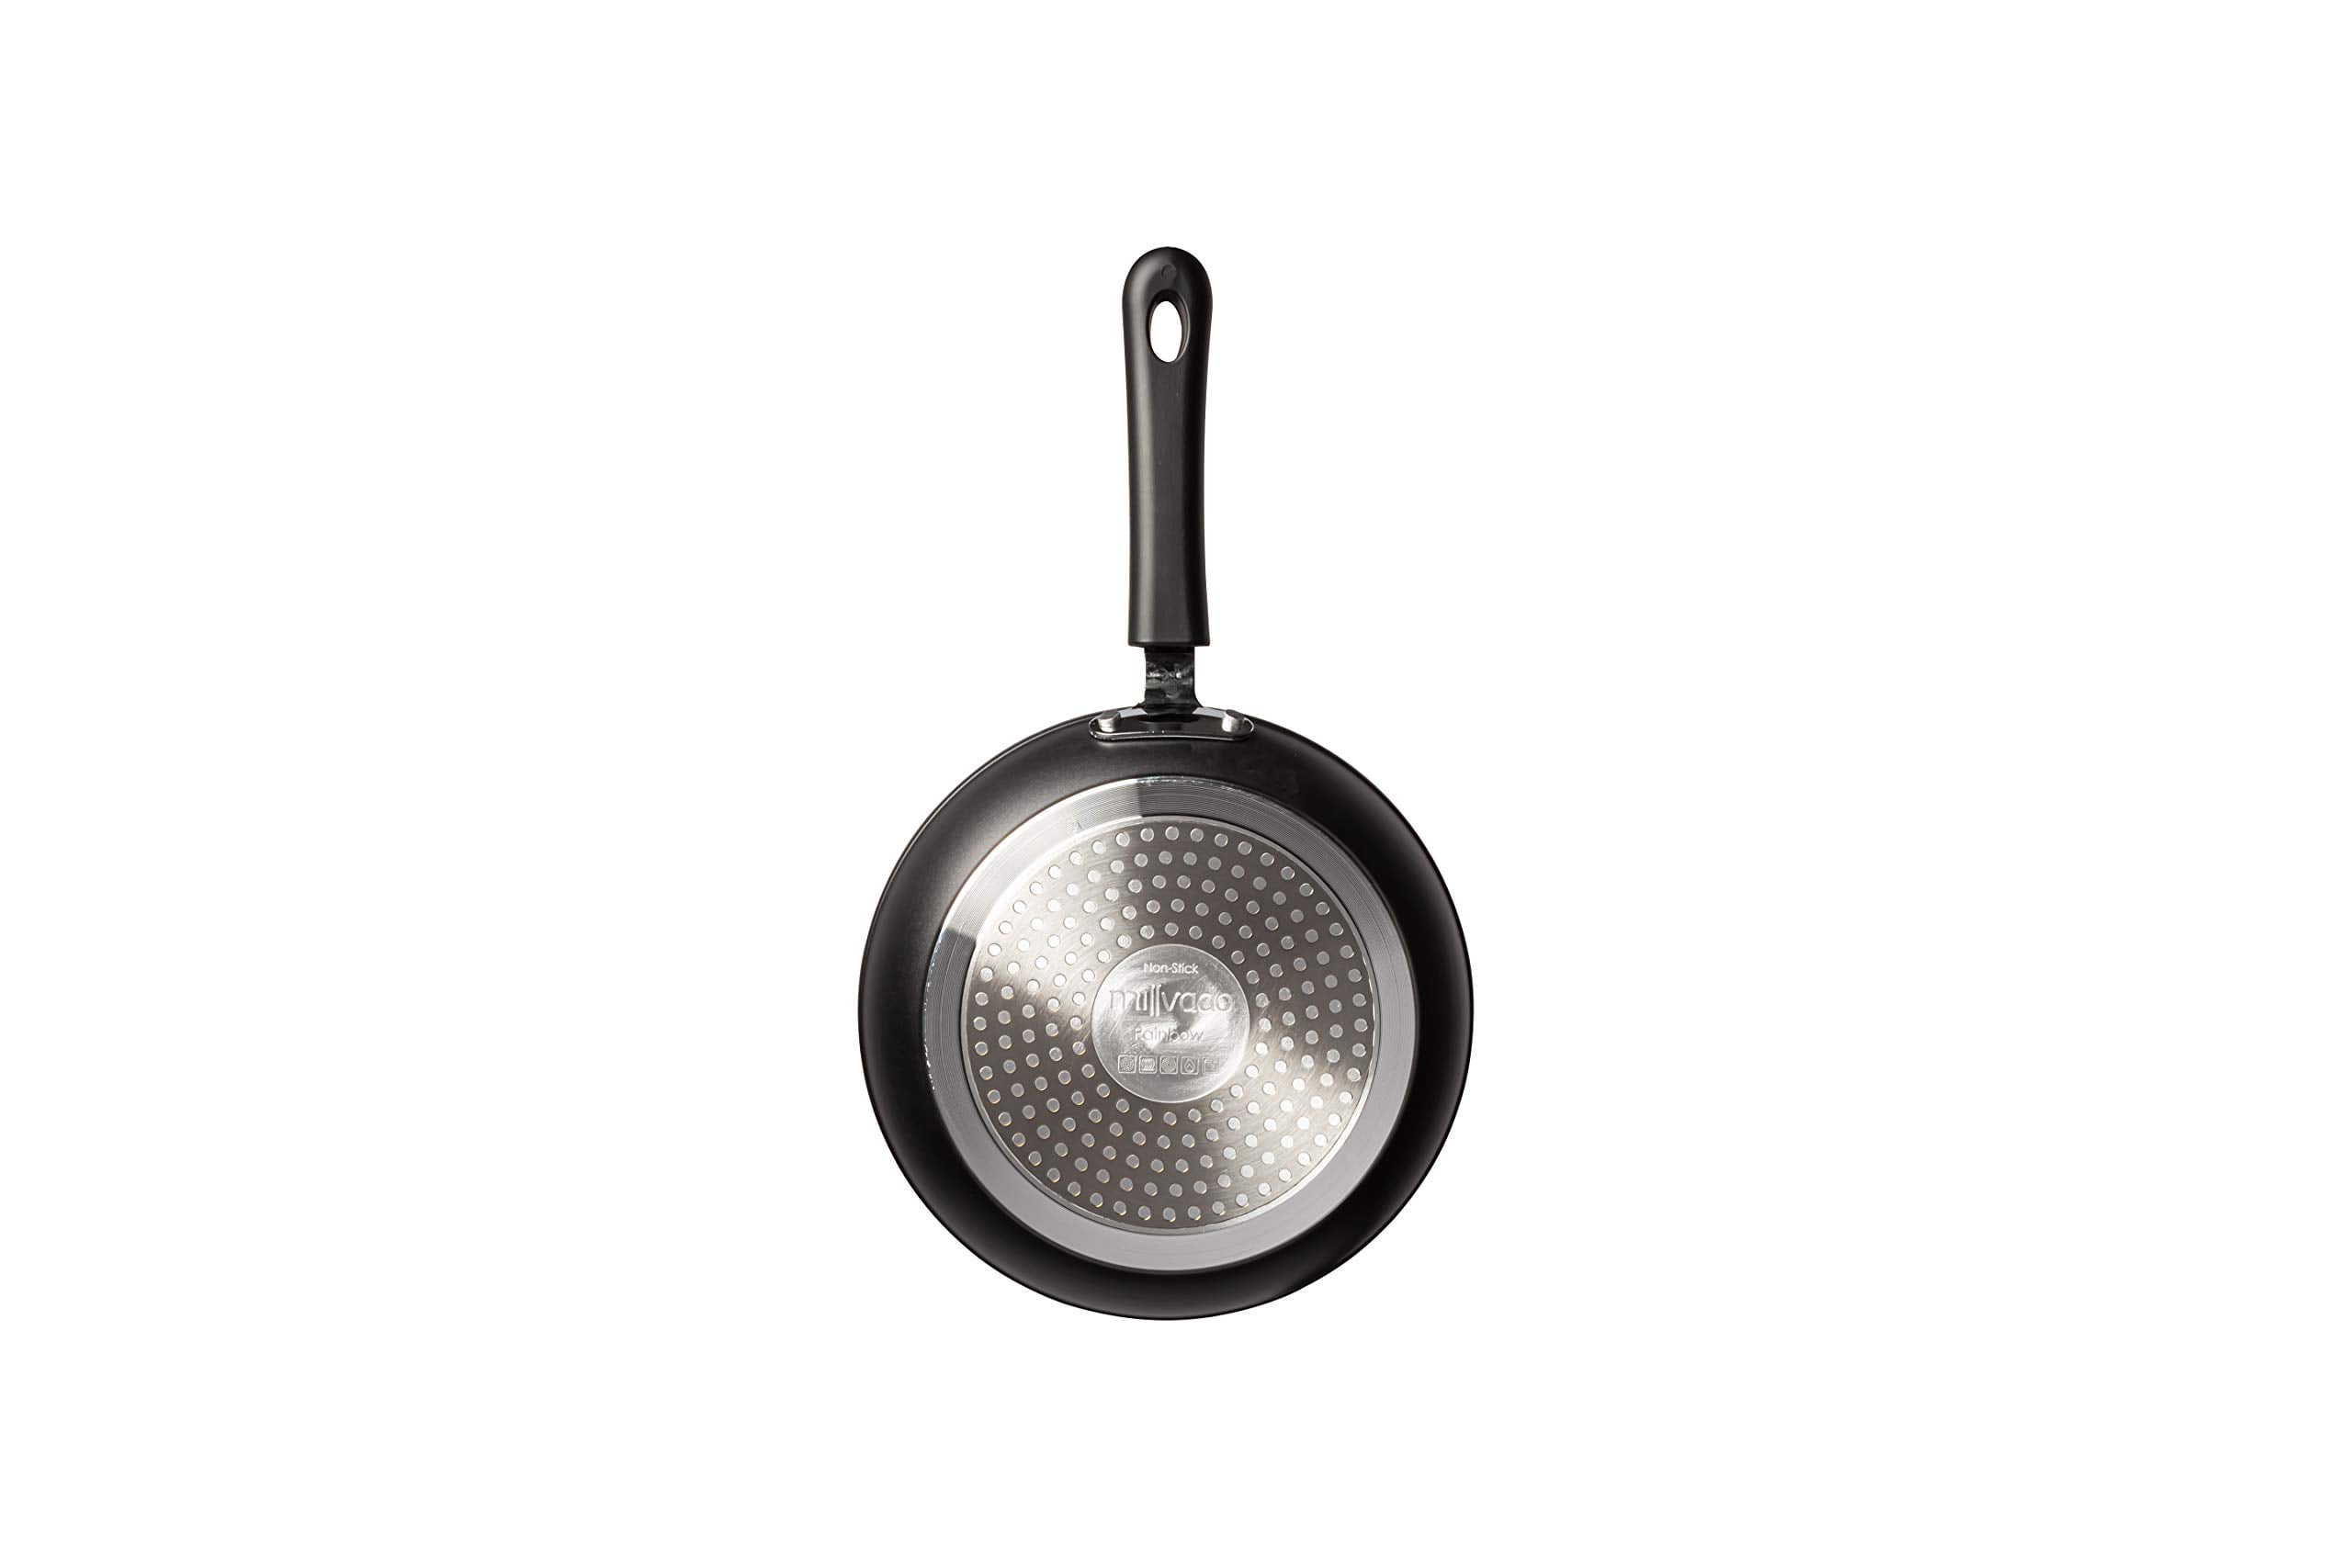 Millvado 8 Nonstick Frying Pan: Small Skillet With Heavy Duty Non